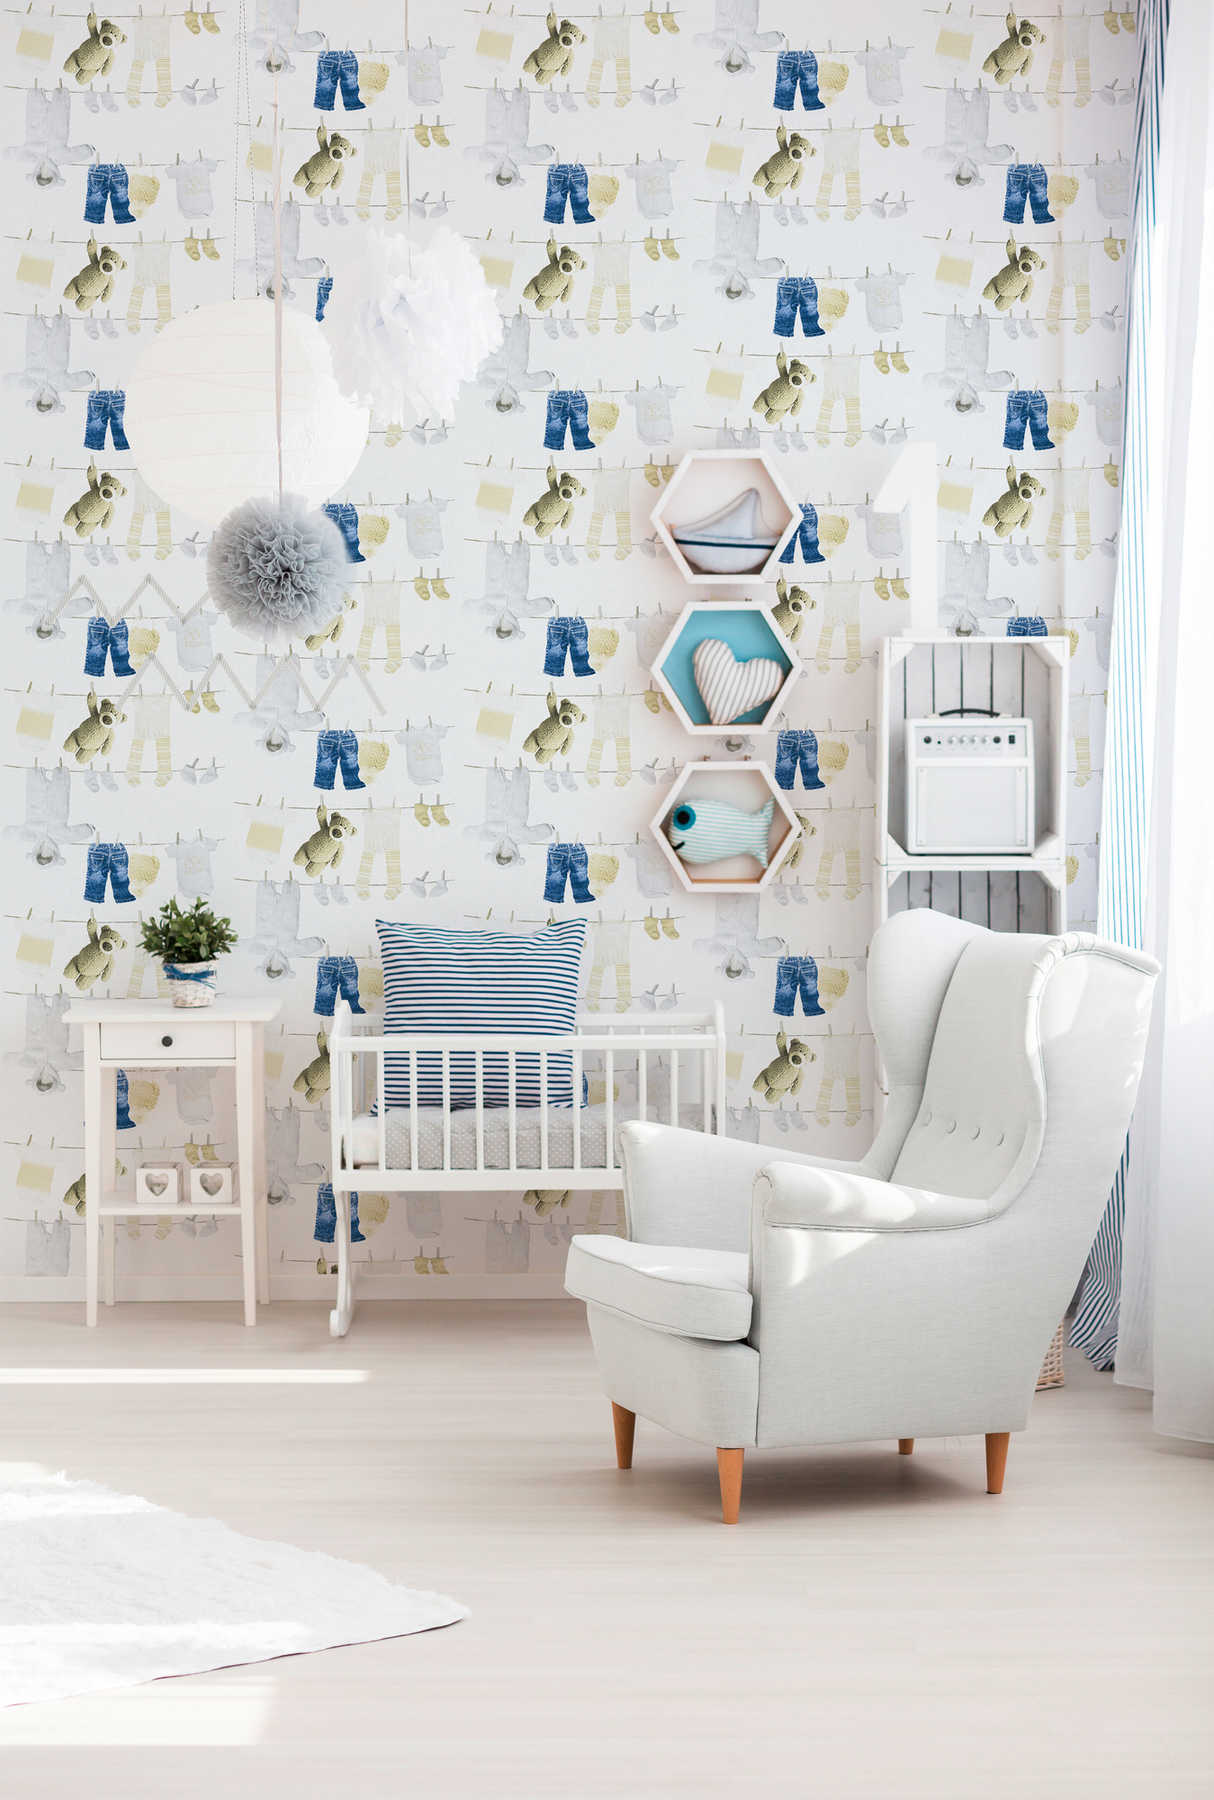             Baby room wallpaper with children motif clotheslines - white
        